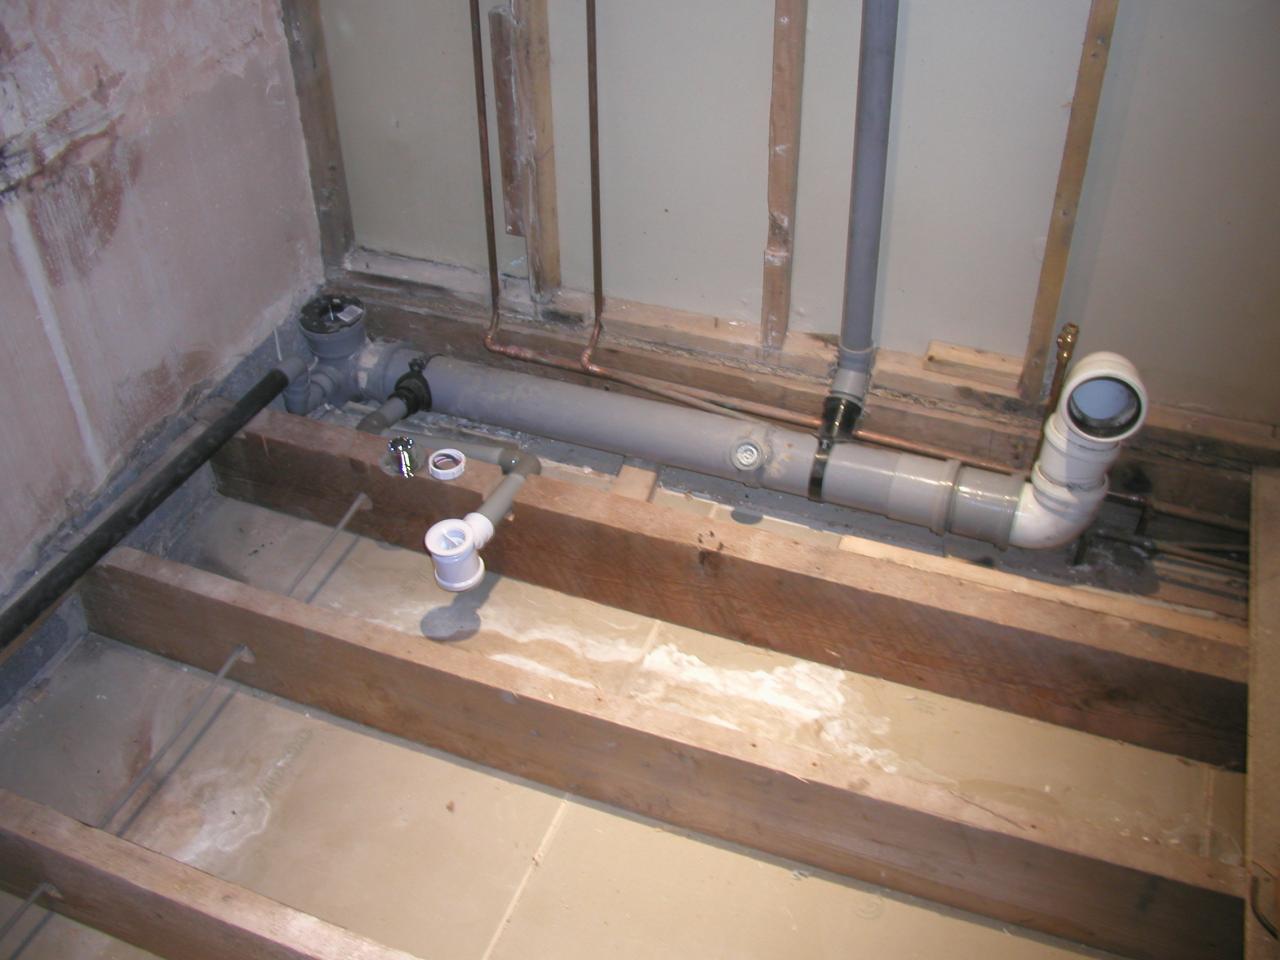 JPEG image - Waste pipe for shower in ...